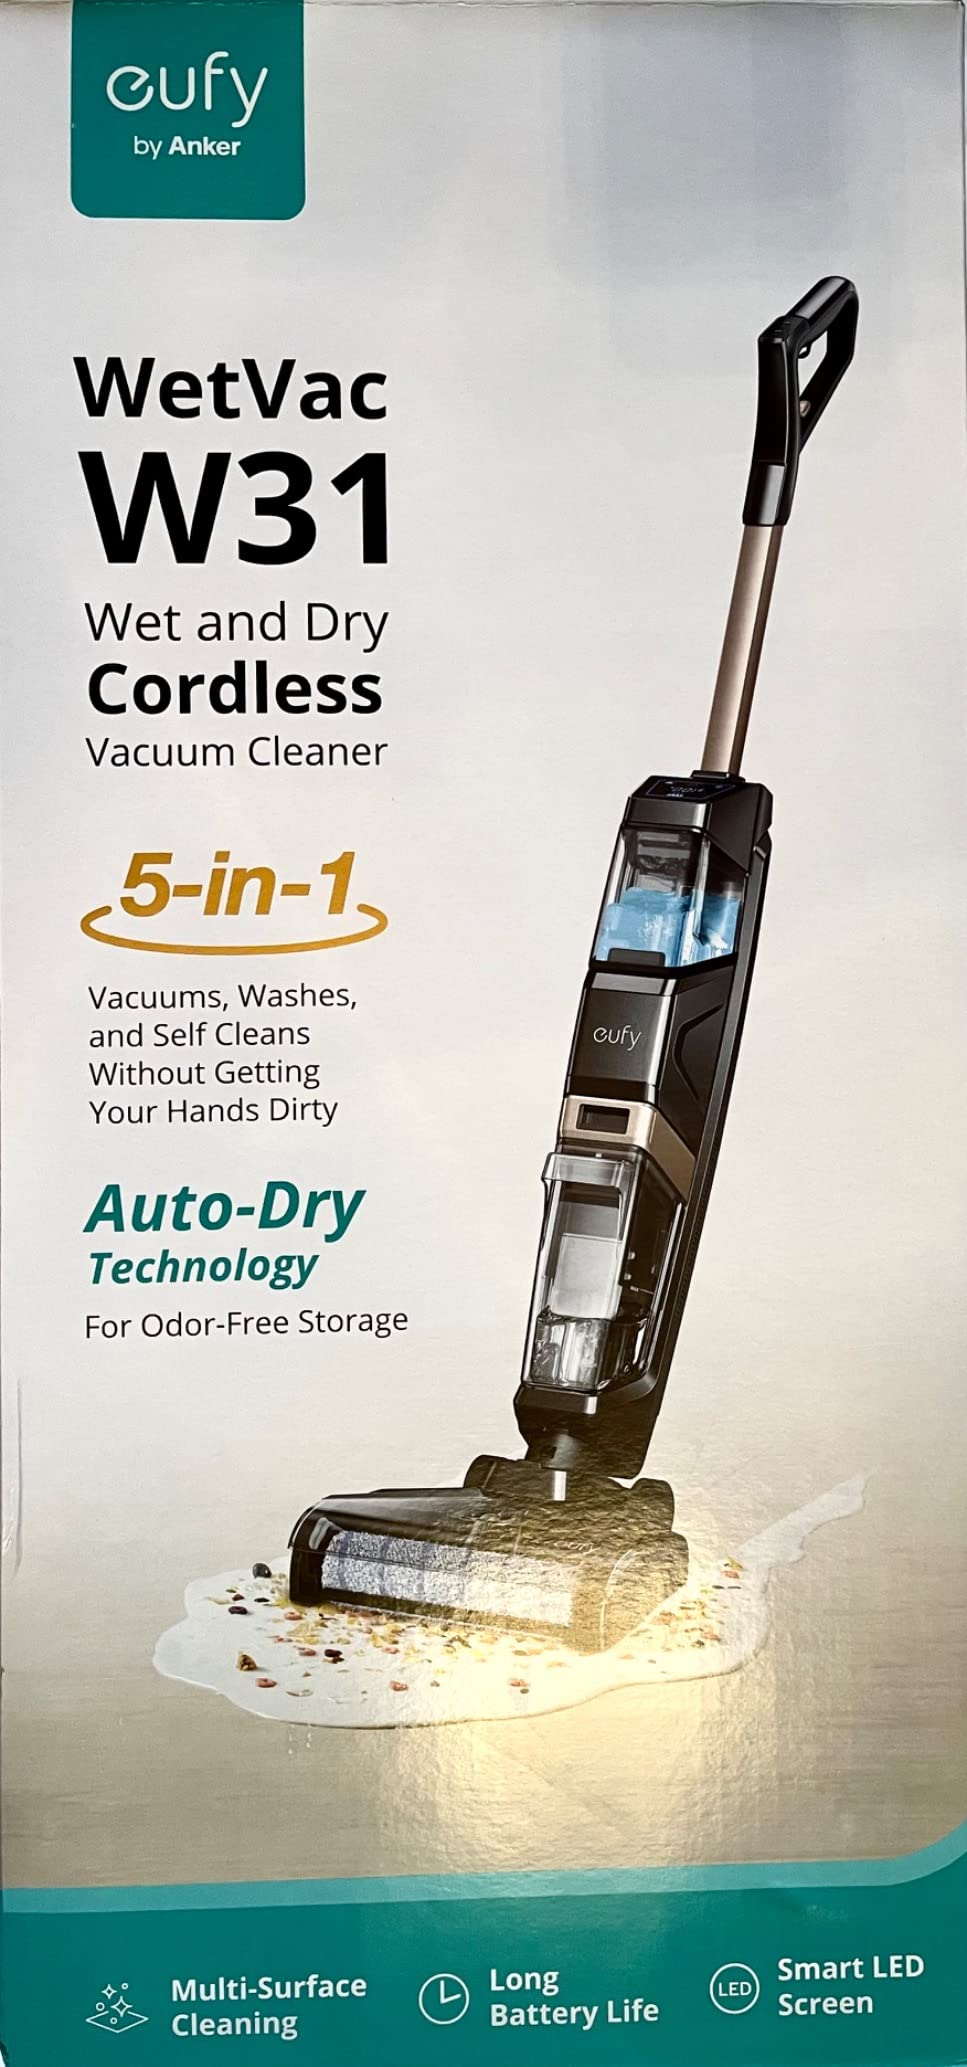  Eufy by Anker wetvac cordless cleaner w31